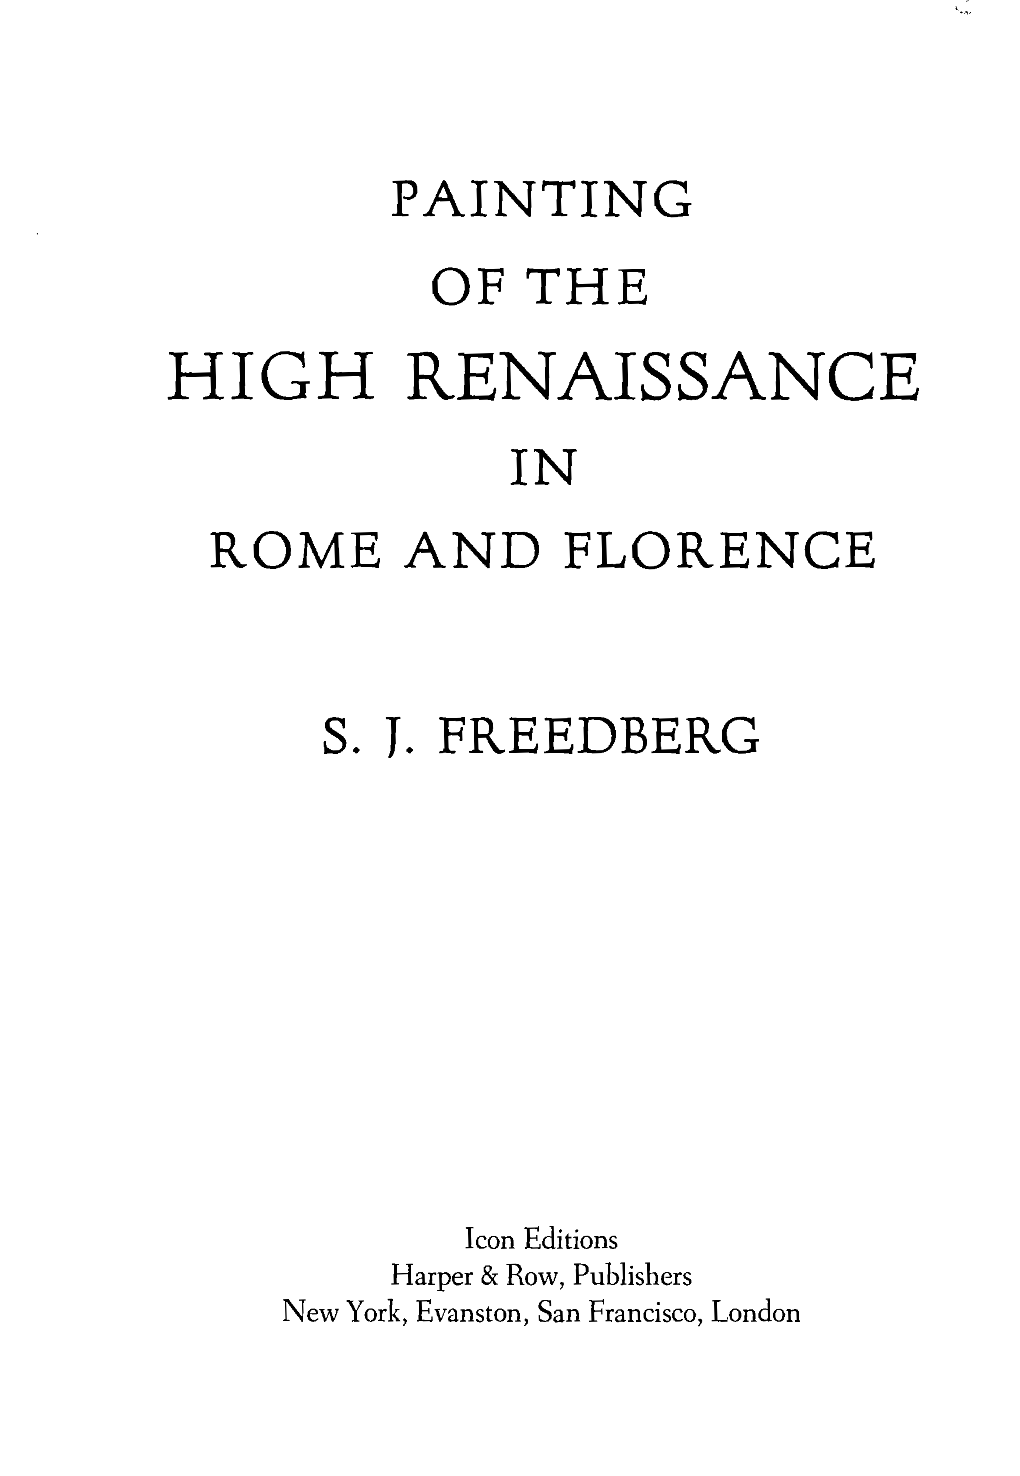 High Renaissance in Rome and Florence